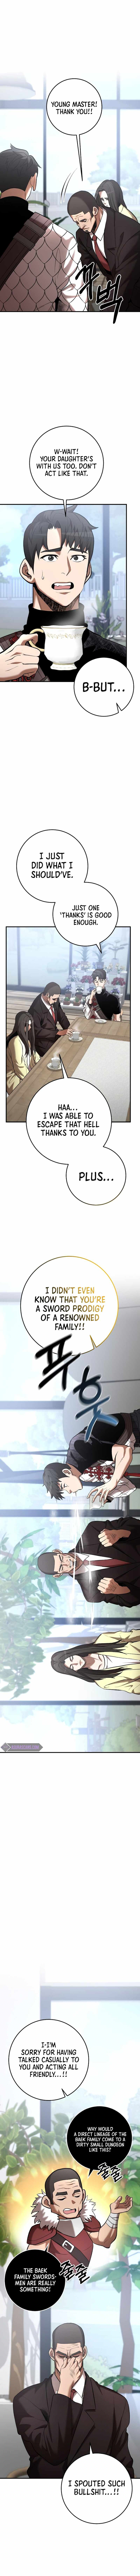 I Became A Renowned Family’S Sword Prodigy - Page 3